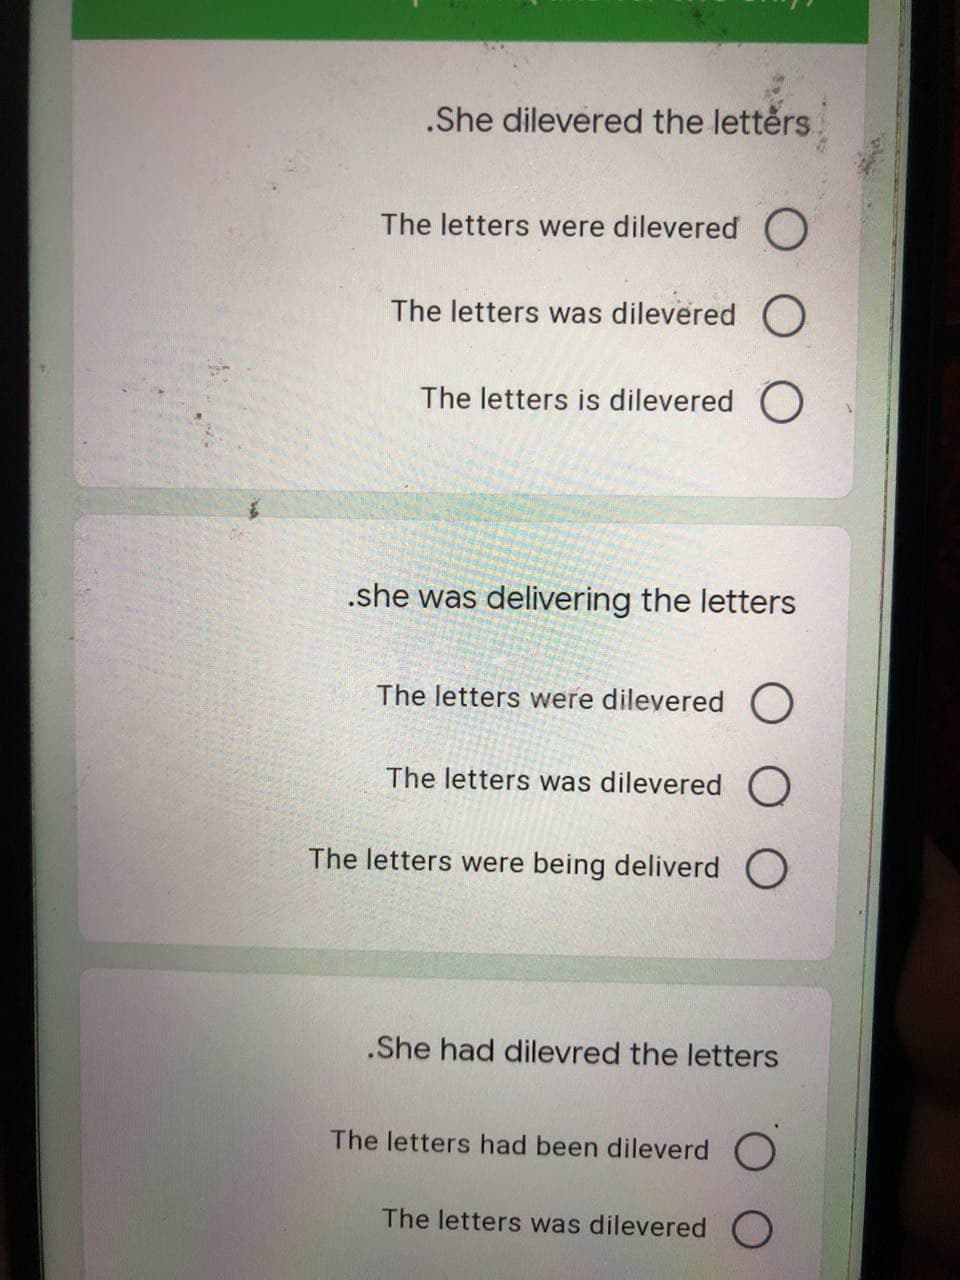 .She dilevered the lettérs
The letters were dilevered O
The letters was dilevered O
The letters is dilevered O
.she was delivering the letters
The letters were dilevered O
The letters was dilevered O
The letters were being deliverd O
.She had dilevred the letters
The letters had been dileverd O
The letters was dilevered O
